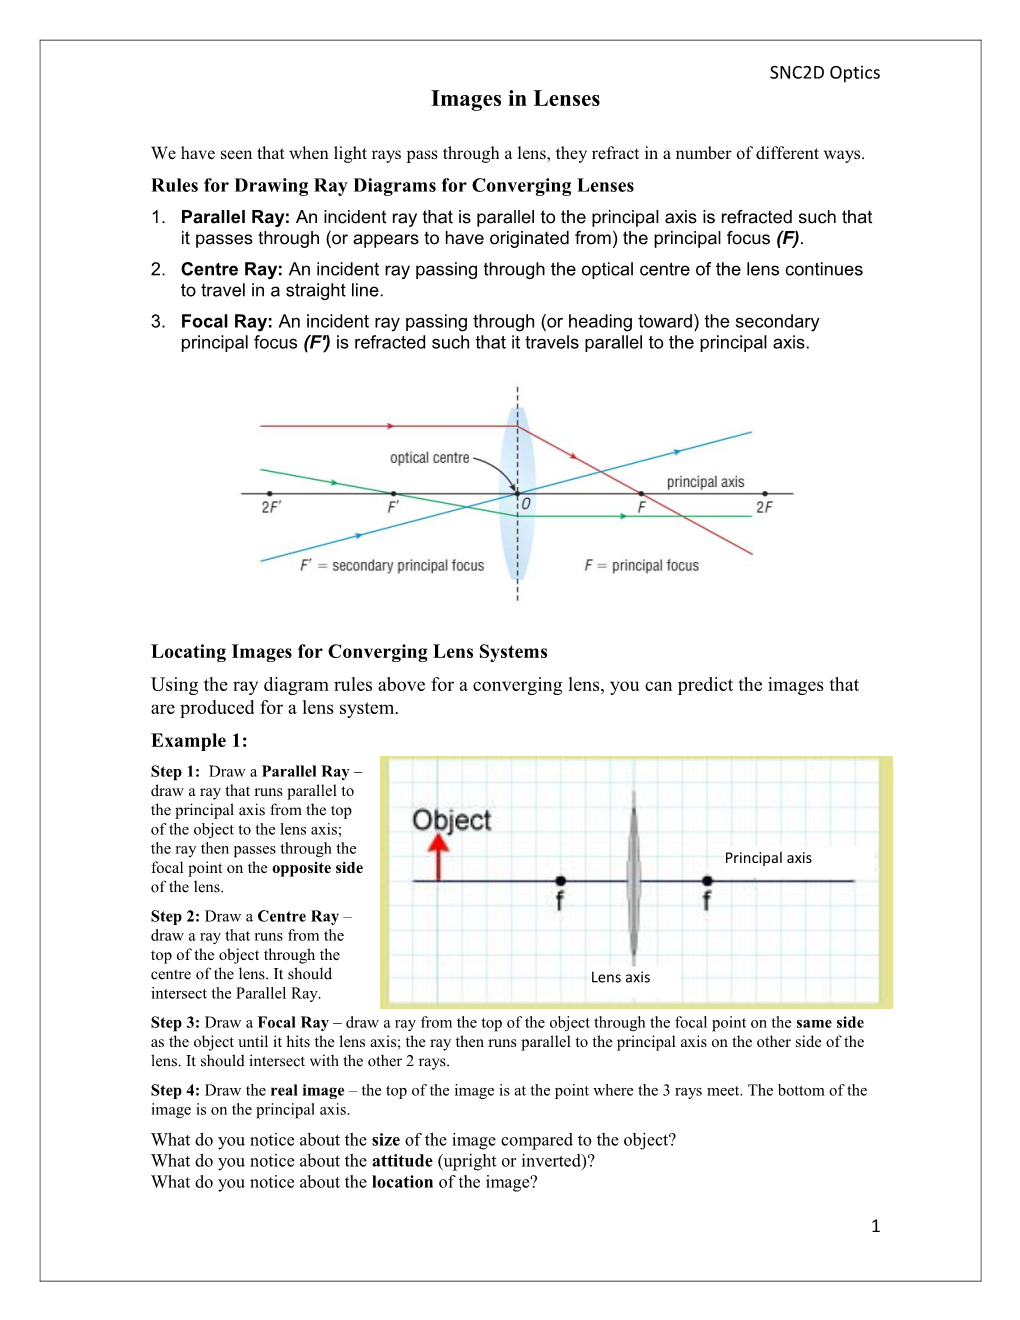 Rules for Drawing Ray Diagrams for Converging Lenses